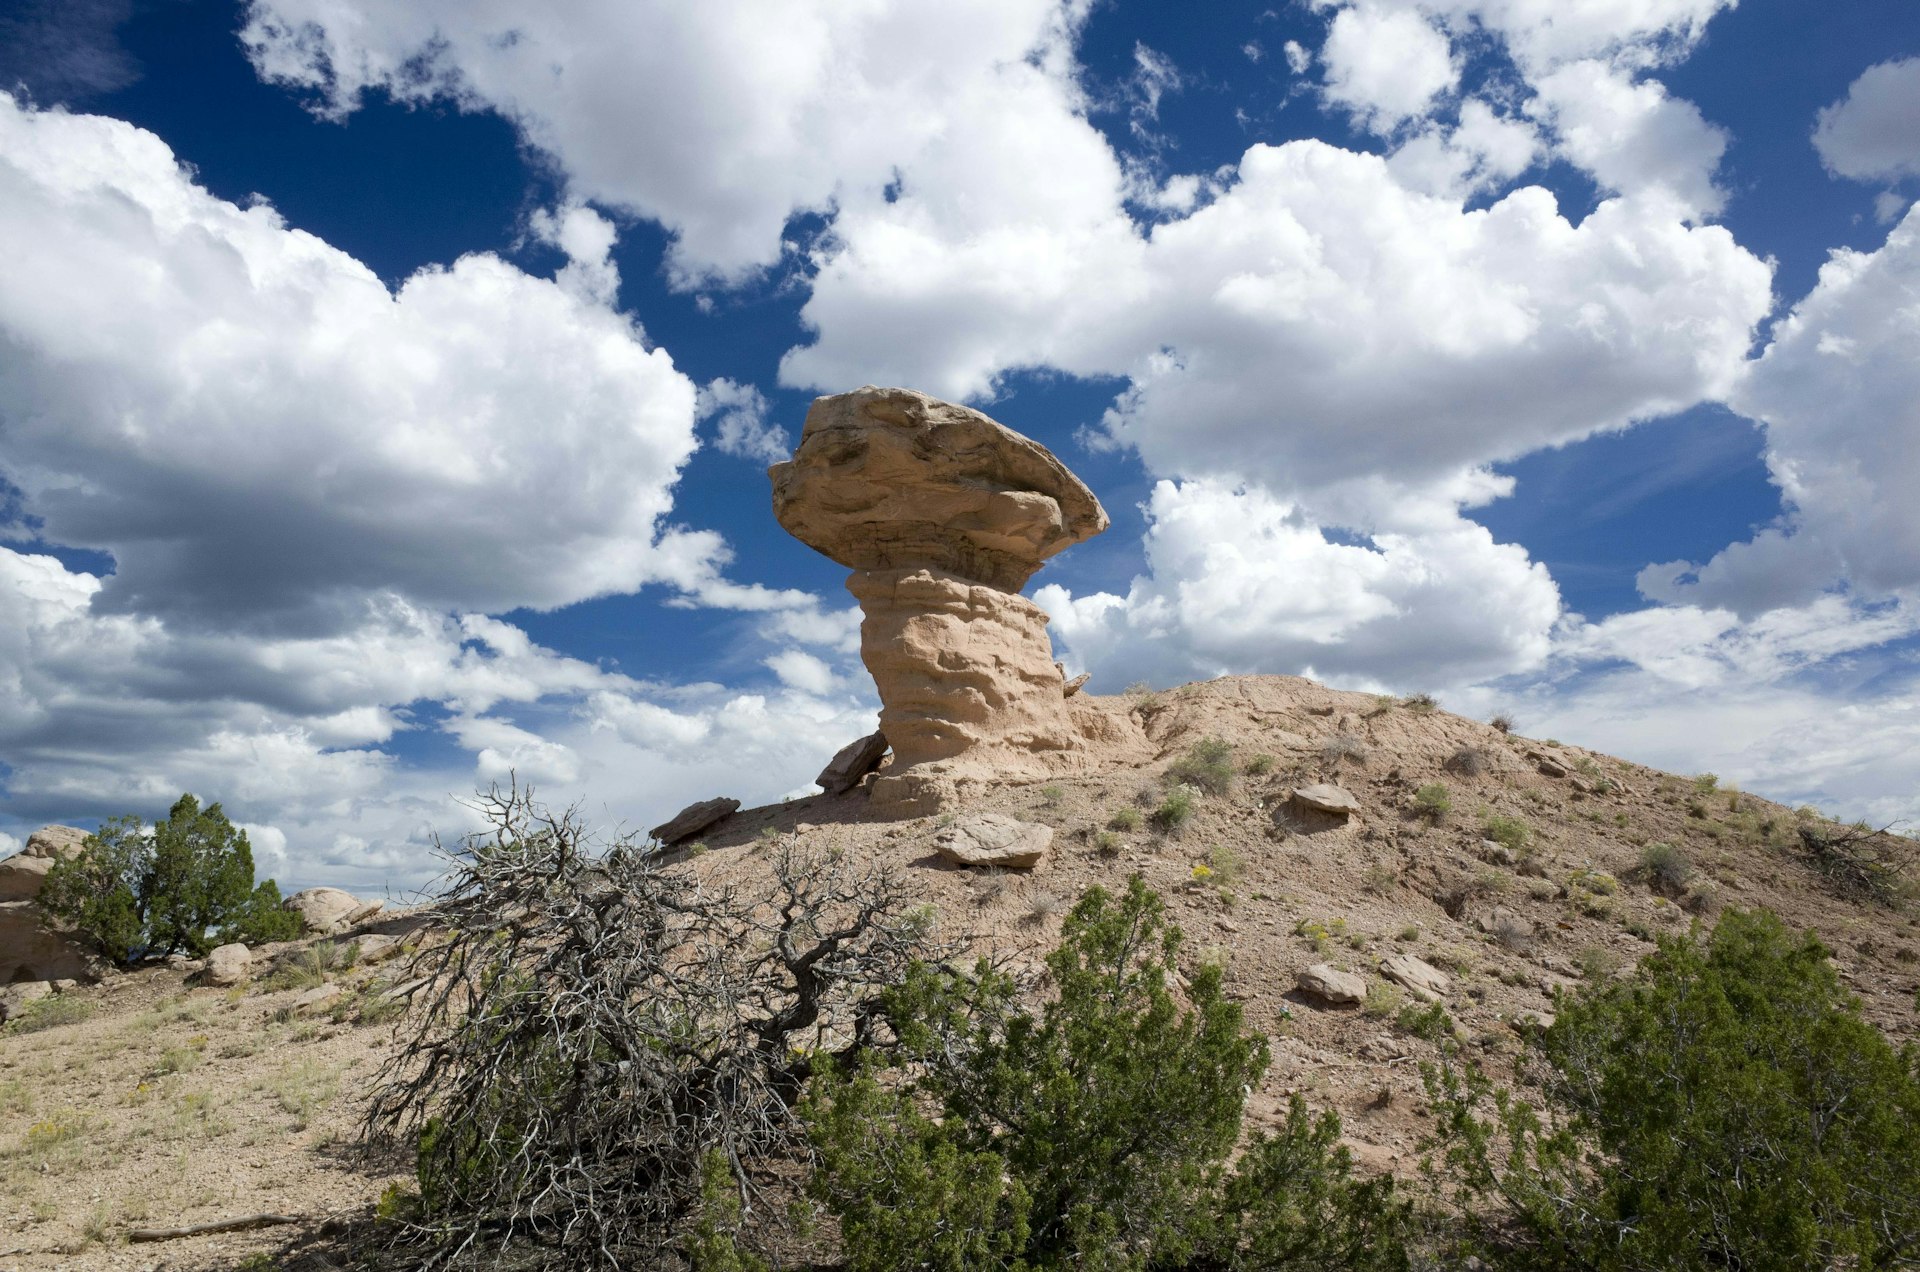 The pinkish sandstone Camel Rock Monument in New Mexico